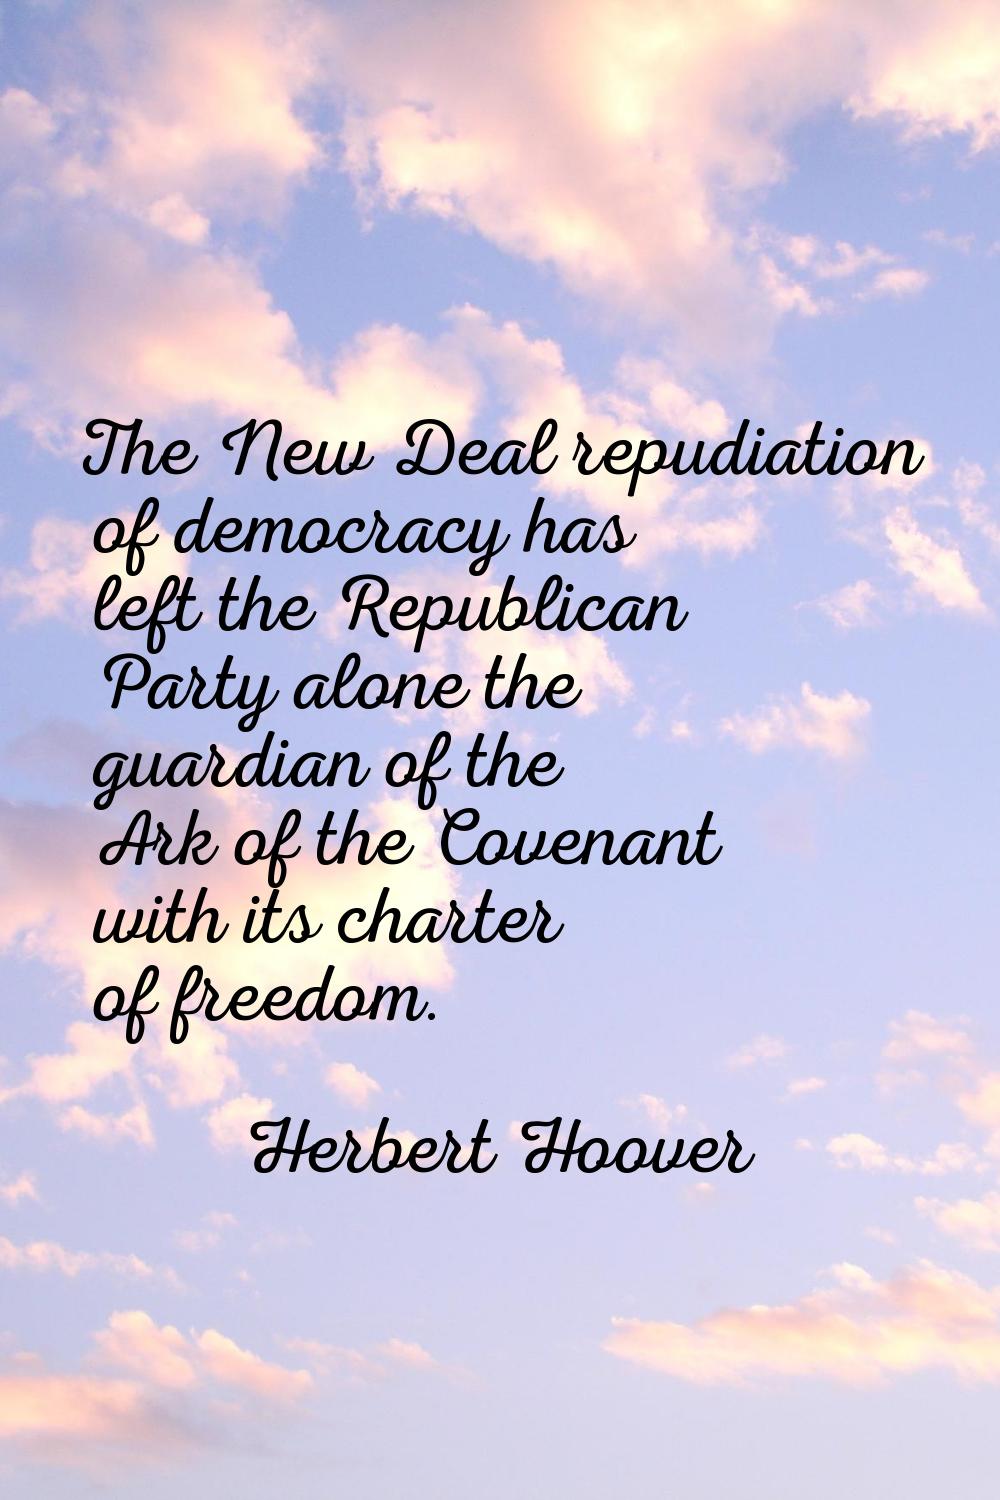 The New Deal repudiation of democracy has left the Republican Party alone the guardian of the Ark o